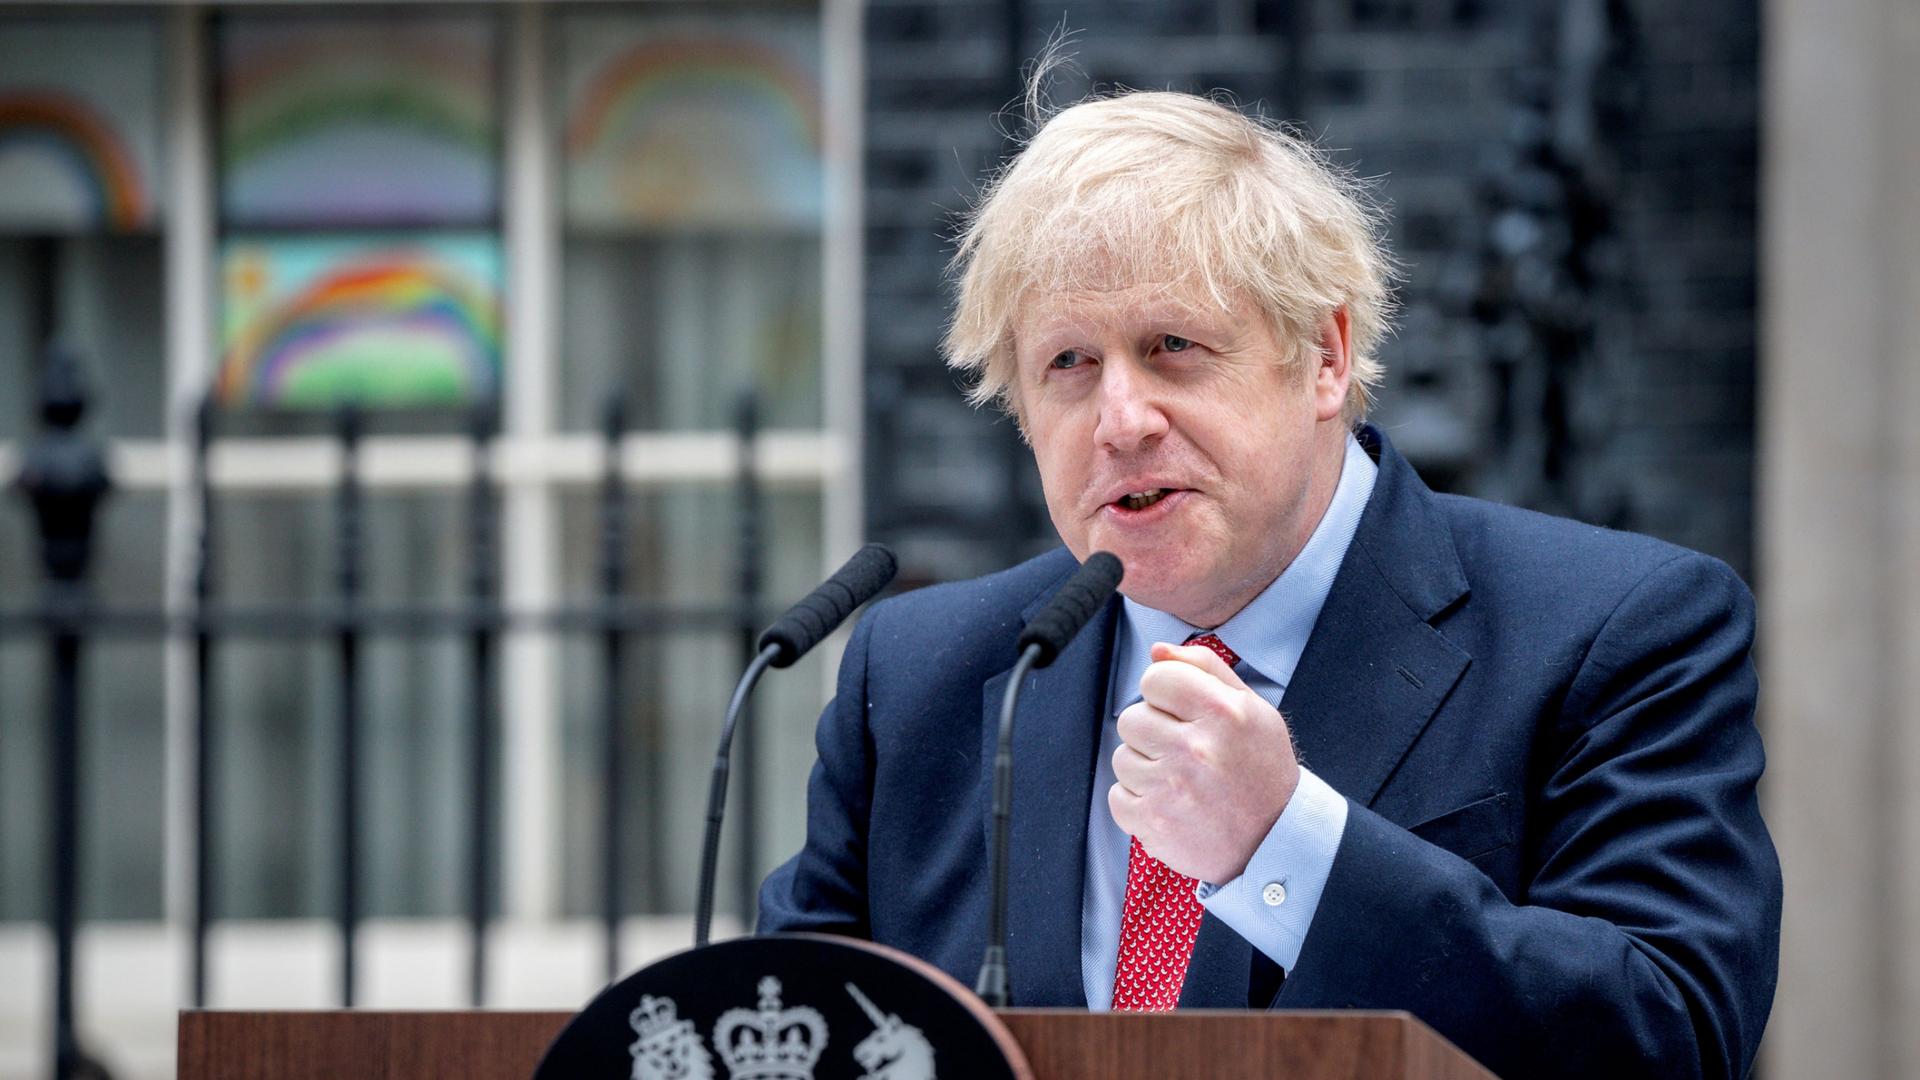 Britain's Prime Minister Boris Johnson is shown speaking from a wooden podium with his fist raised and clenched.